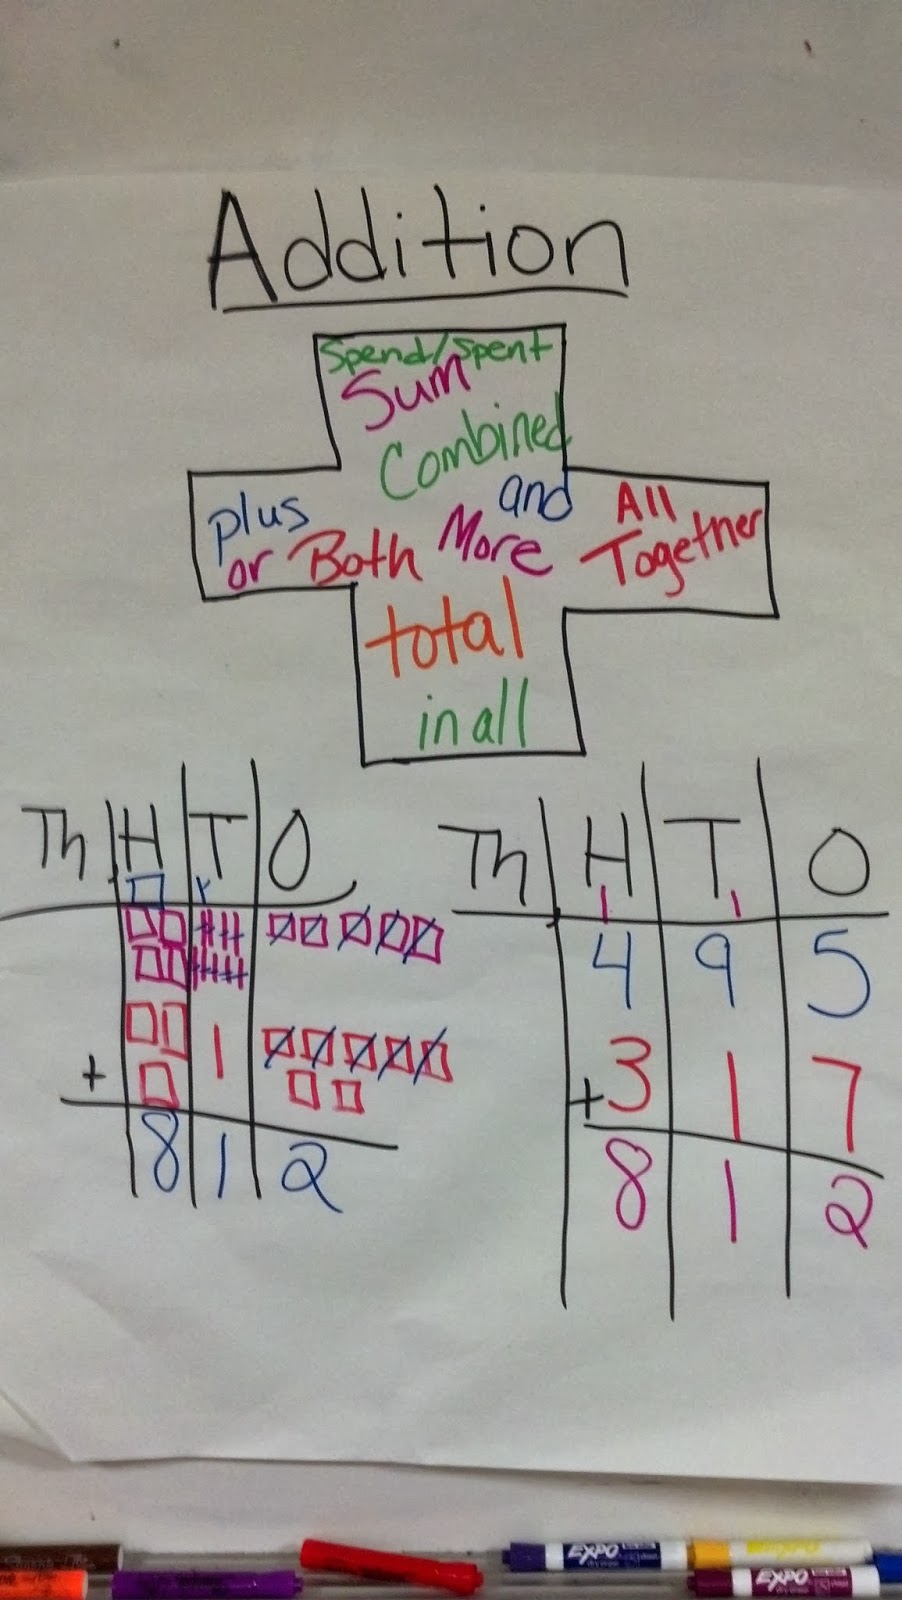 Parent & Student Information: Addition with Regrouping